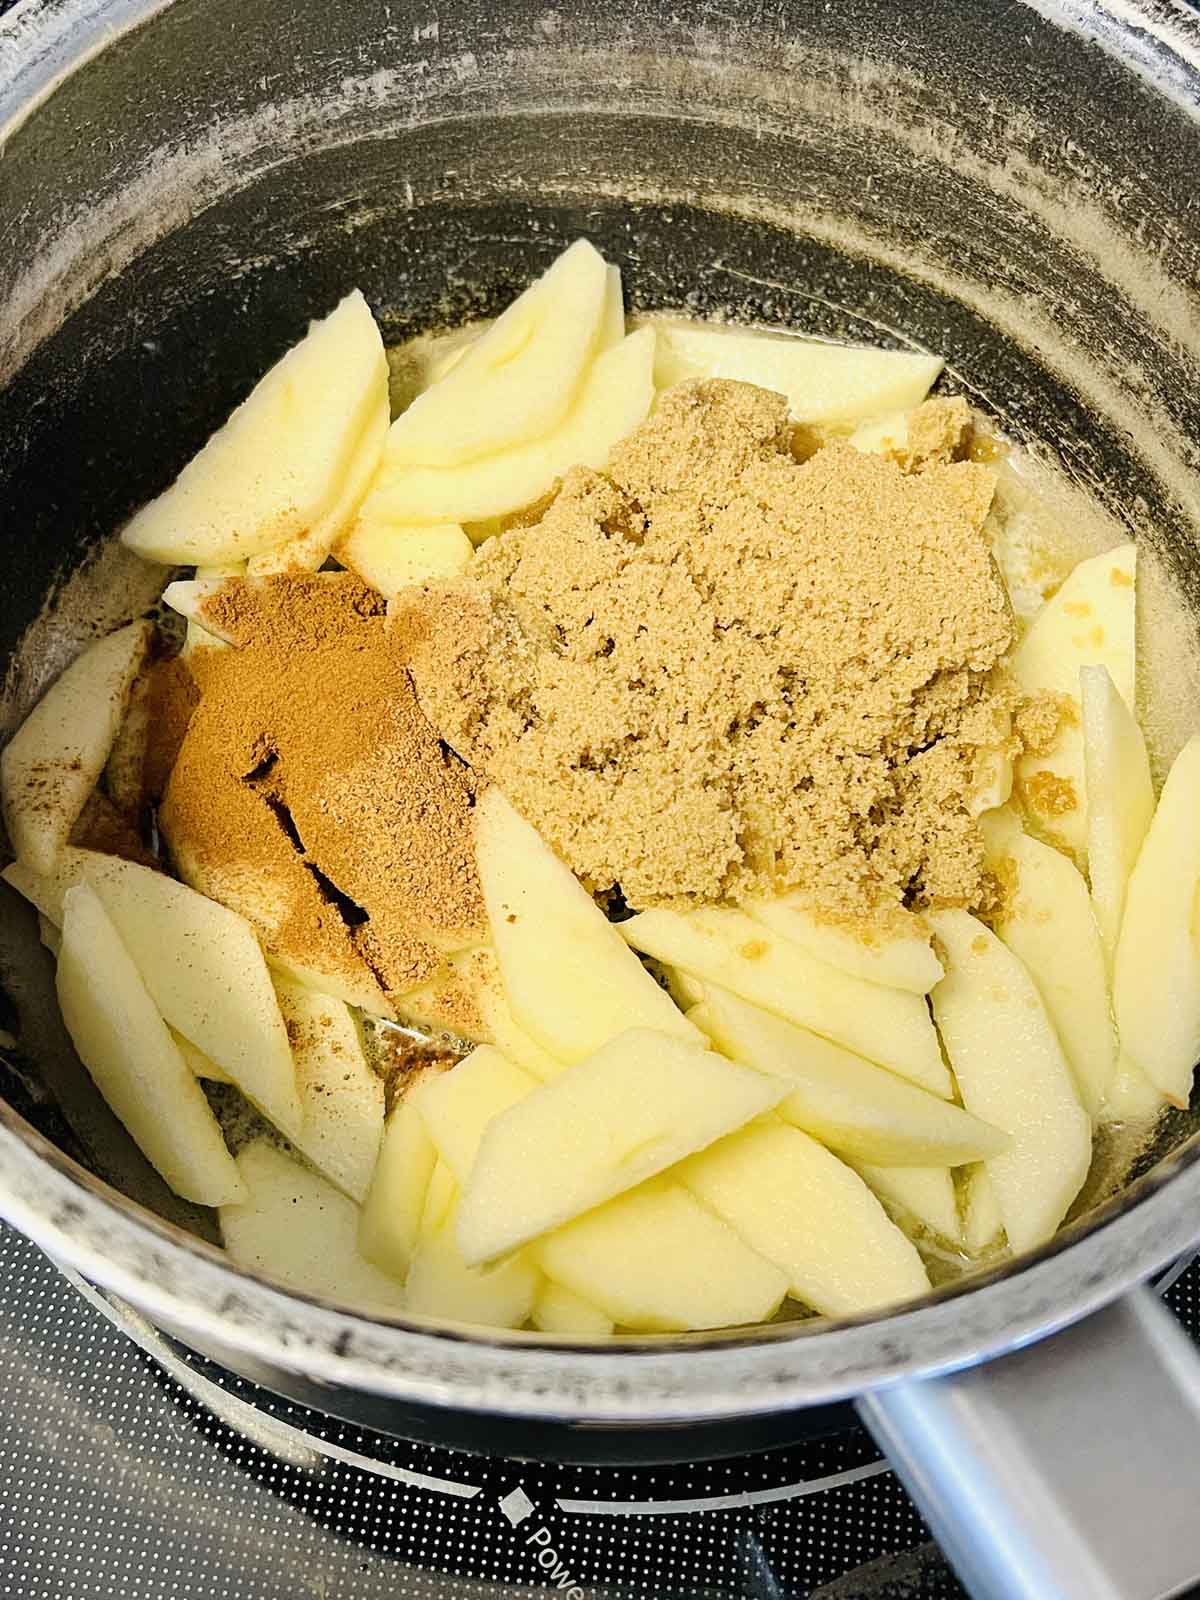 Apples and brown sugar in a pan.